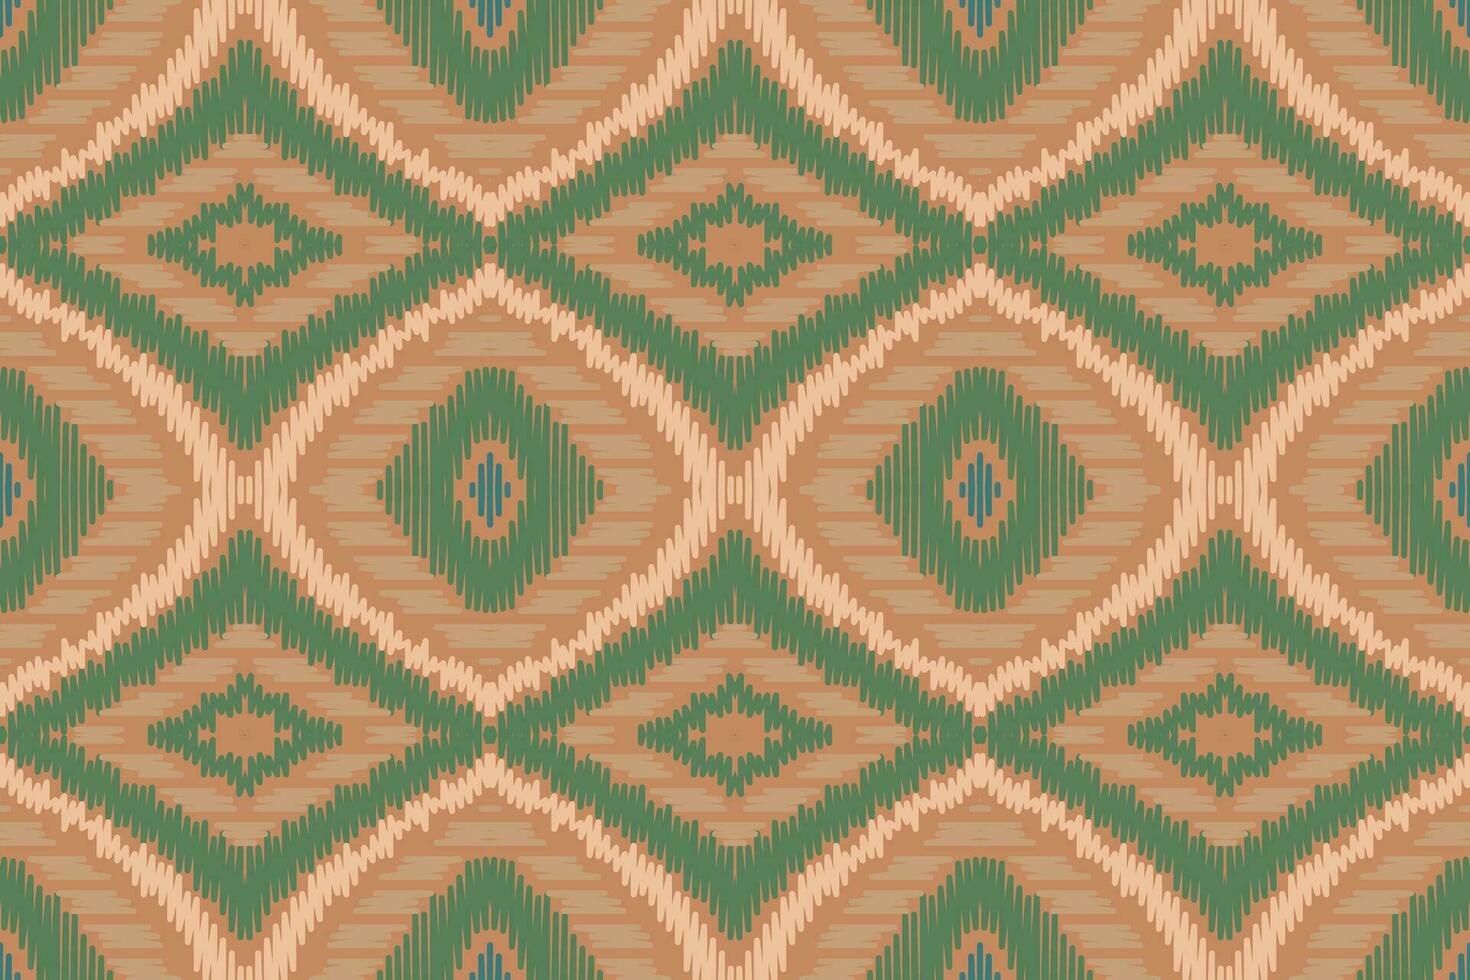 Ikat Fabric Paisley Embroidery Background. Ikat Stripe Geometric Ethnic Oriental Pattern Traditional. Ikat Aztec Style Abstract Design for Print Texture,fabric,saree,sari,carpet. vector